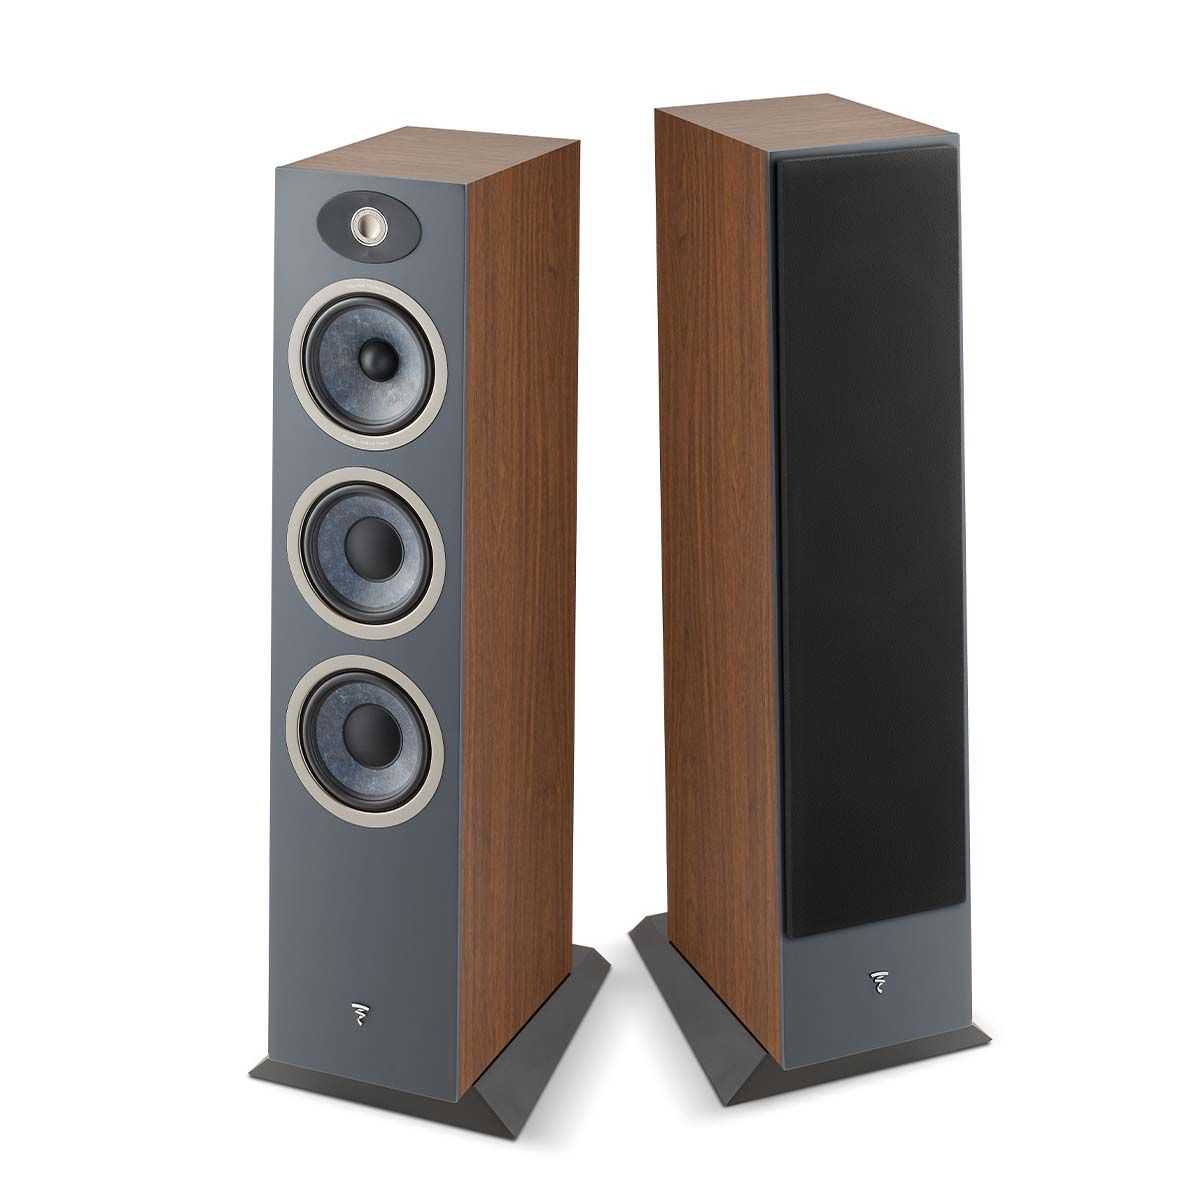 Focal Theva No3 Floorstanding Speaker - Dark Wood - Each - view of pair, one with grille, one without grille